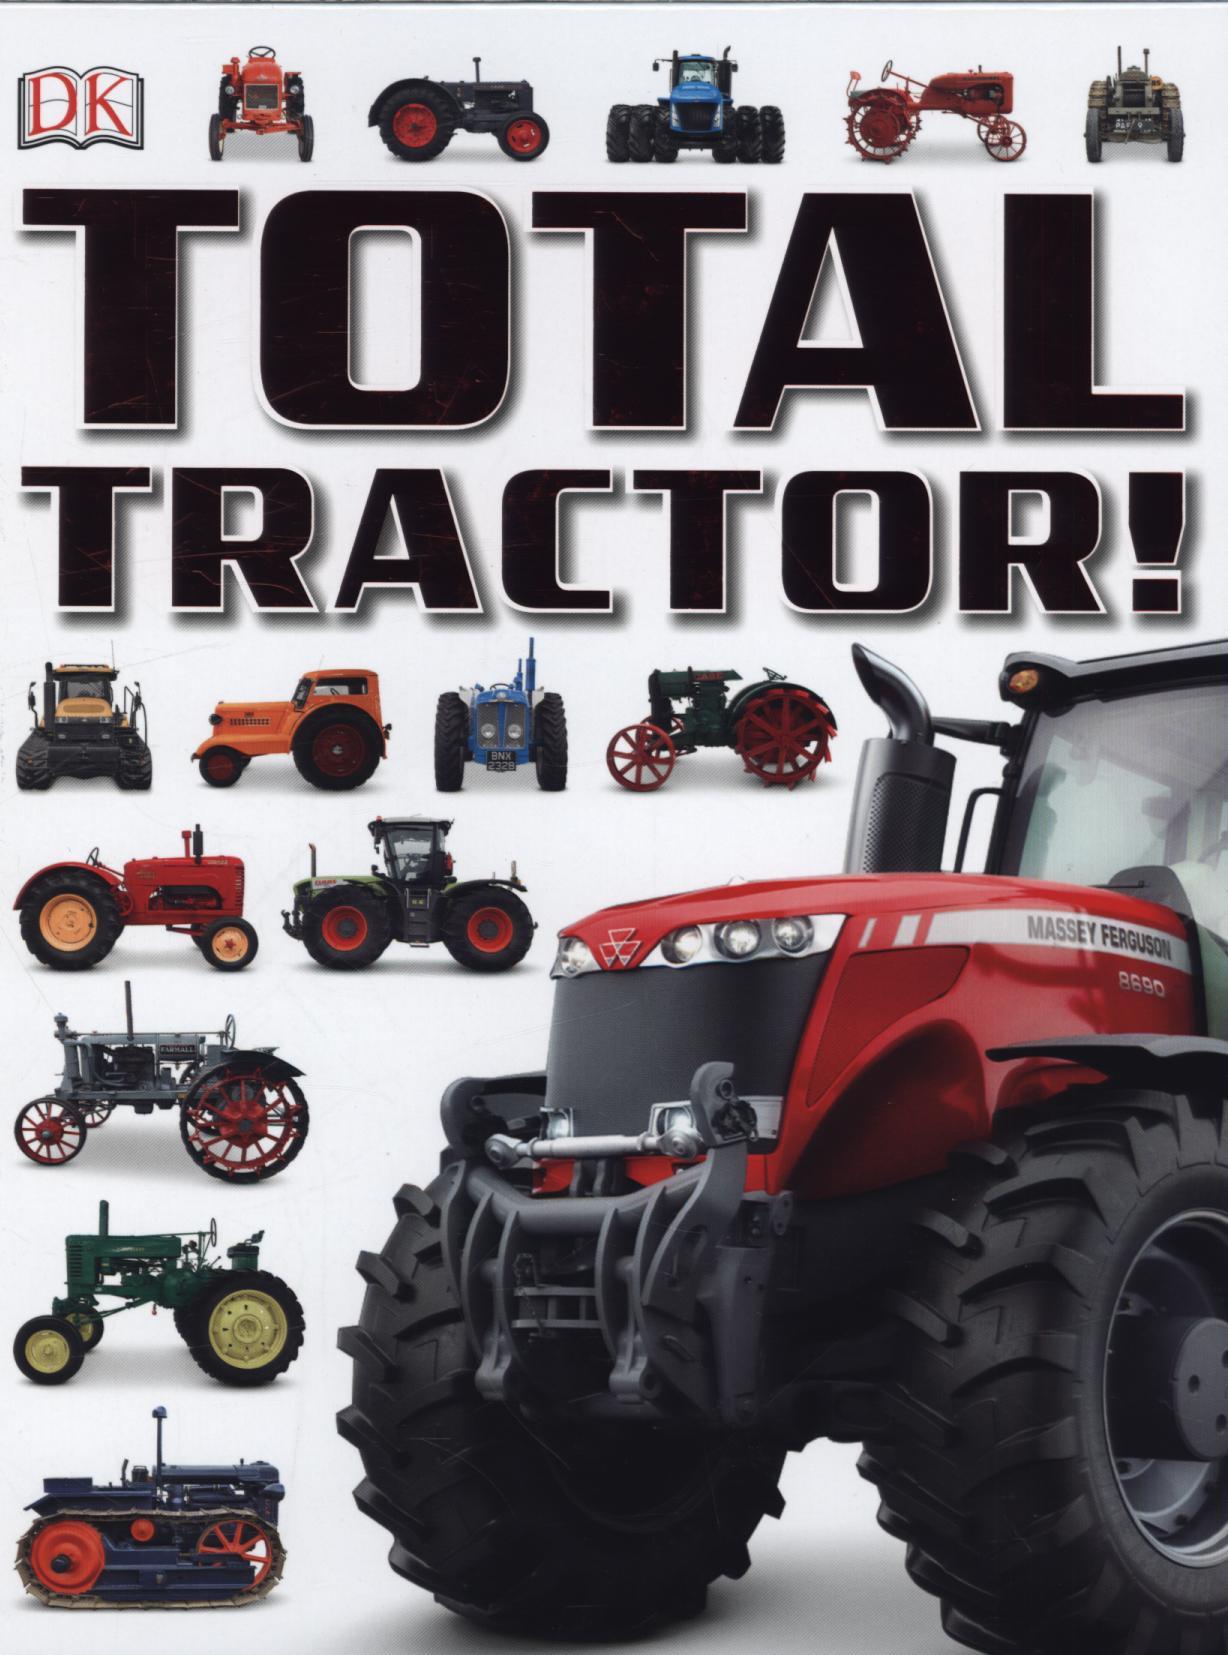 Total Tractor